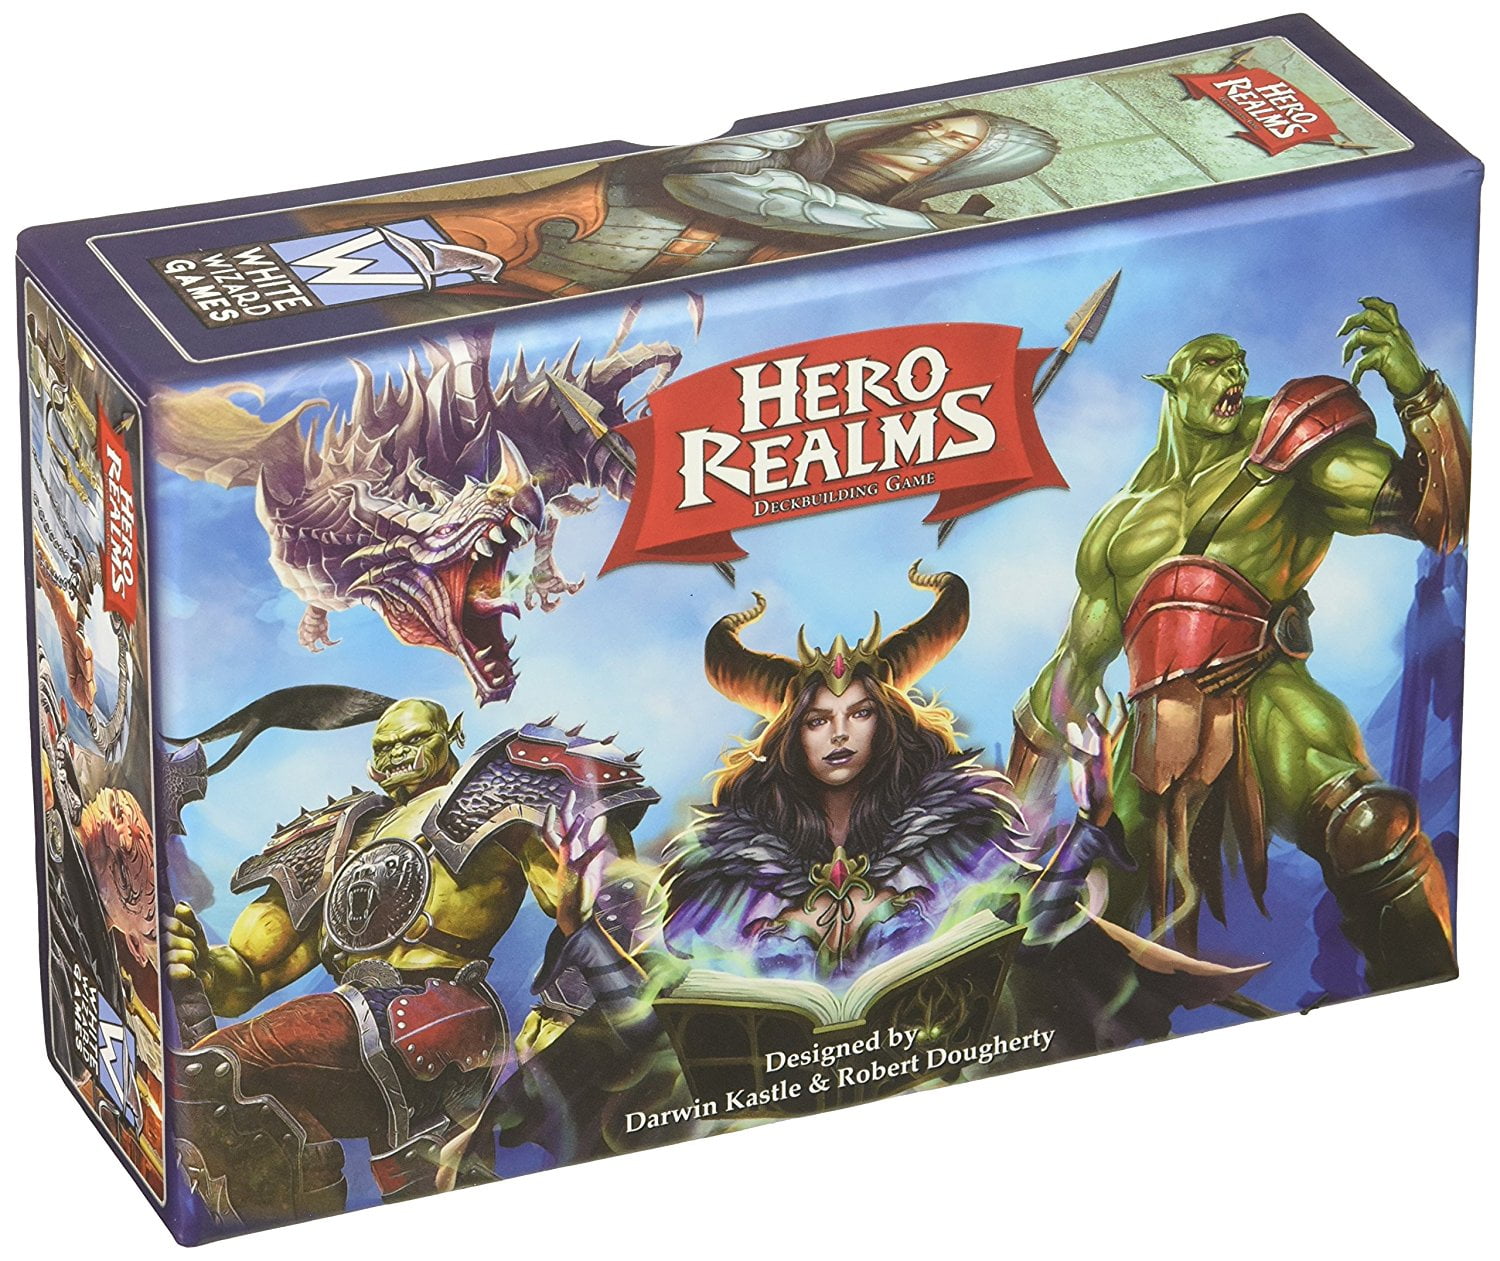 Picture of White Wizard Games WWG500 Hero Realms Deckbuilding Game